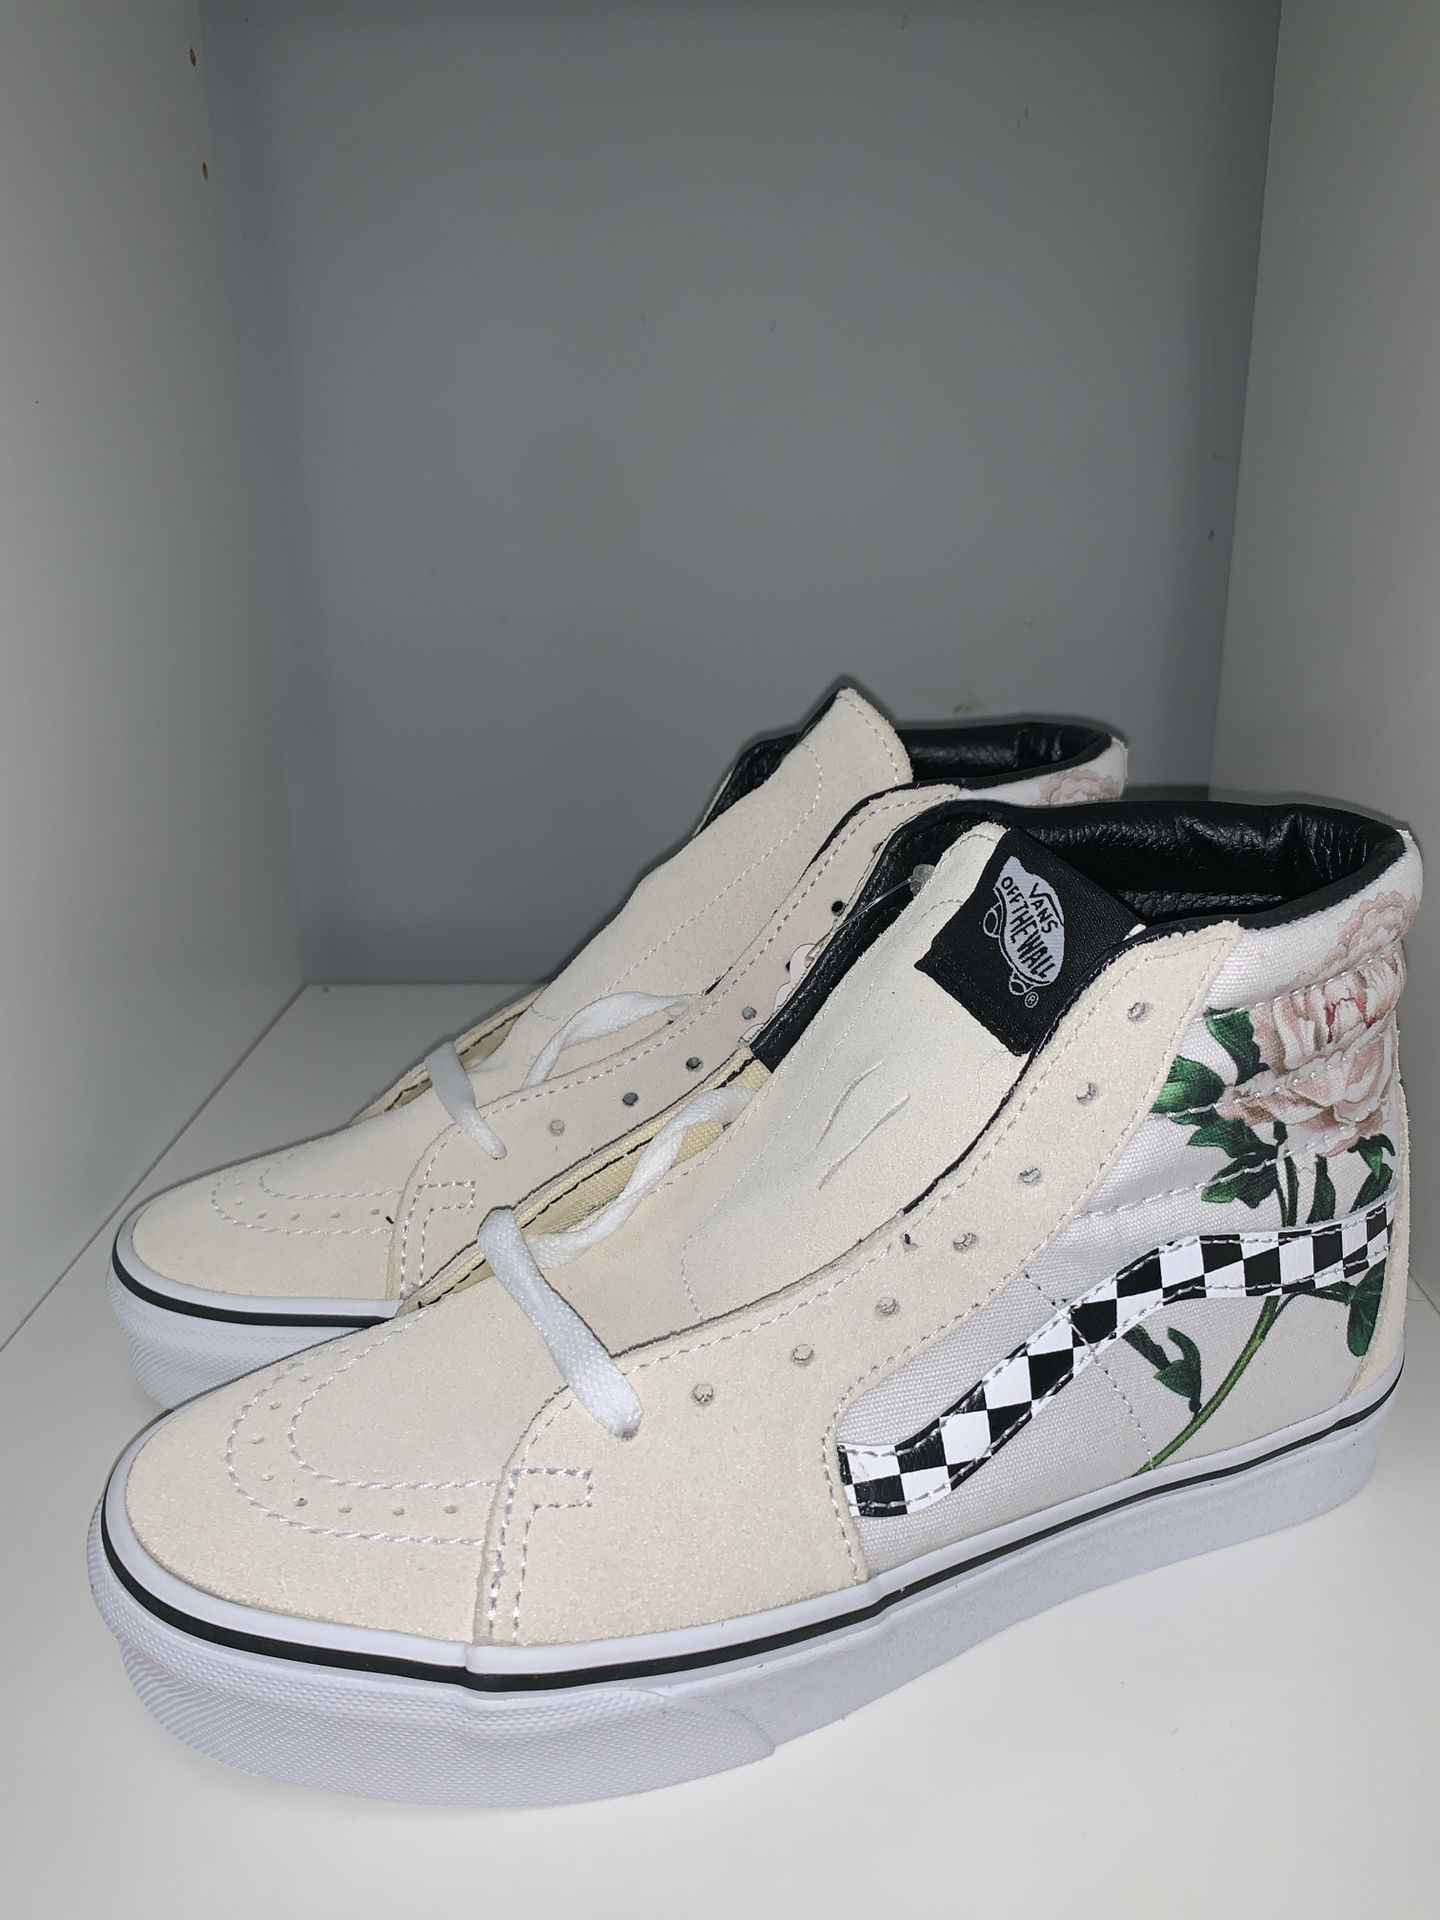 VANS SK8-HI BRAND NEW SIZE 6.5 W only $65 firm